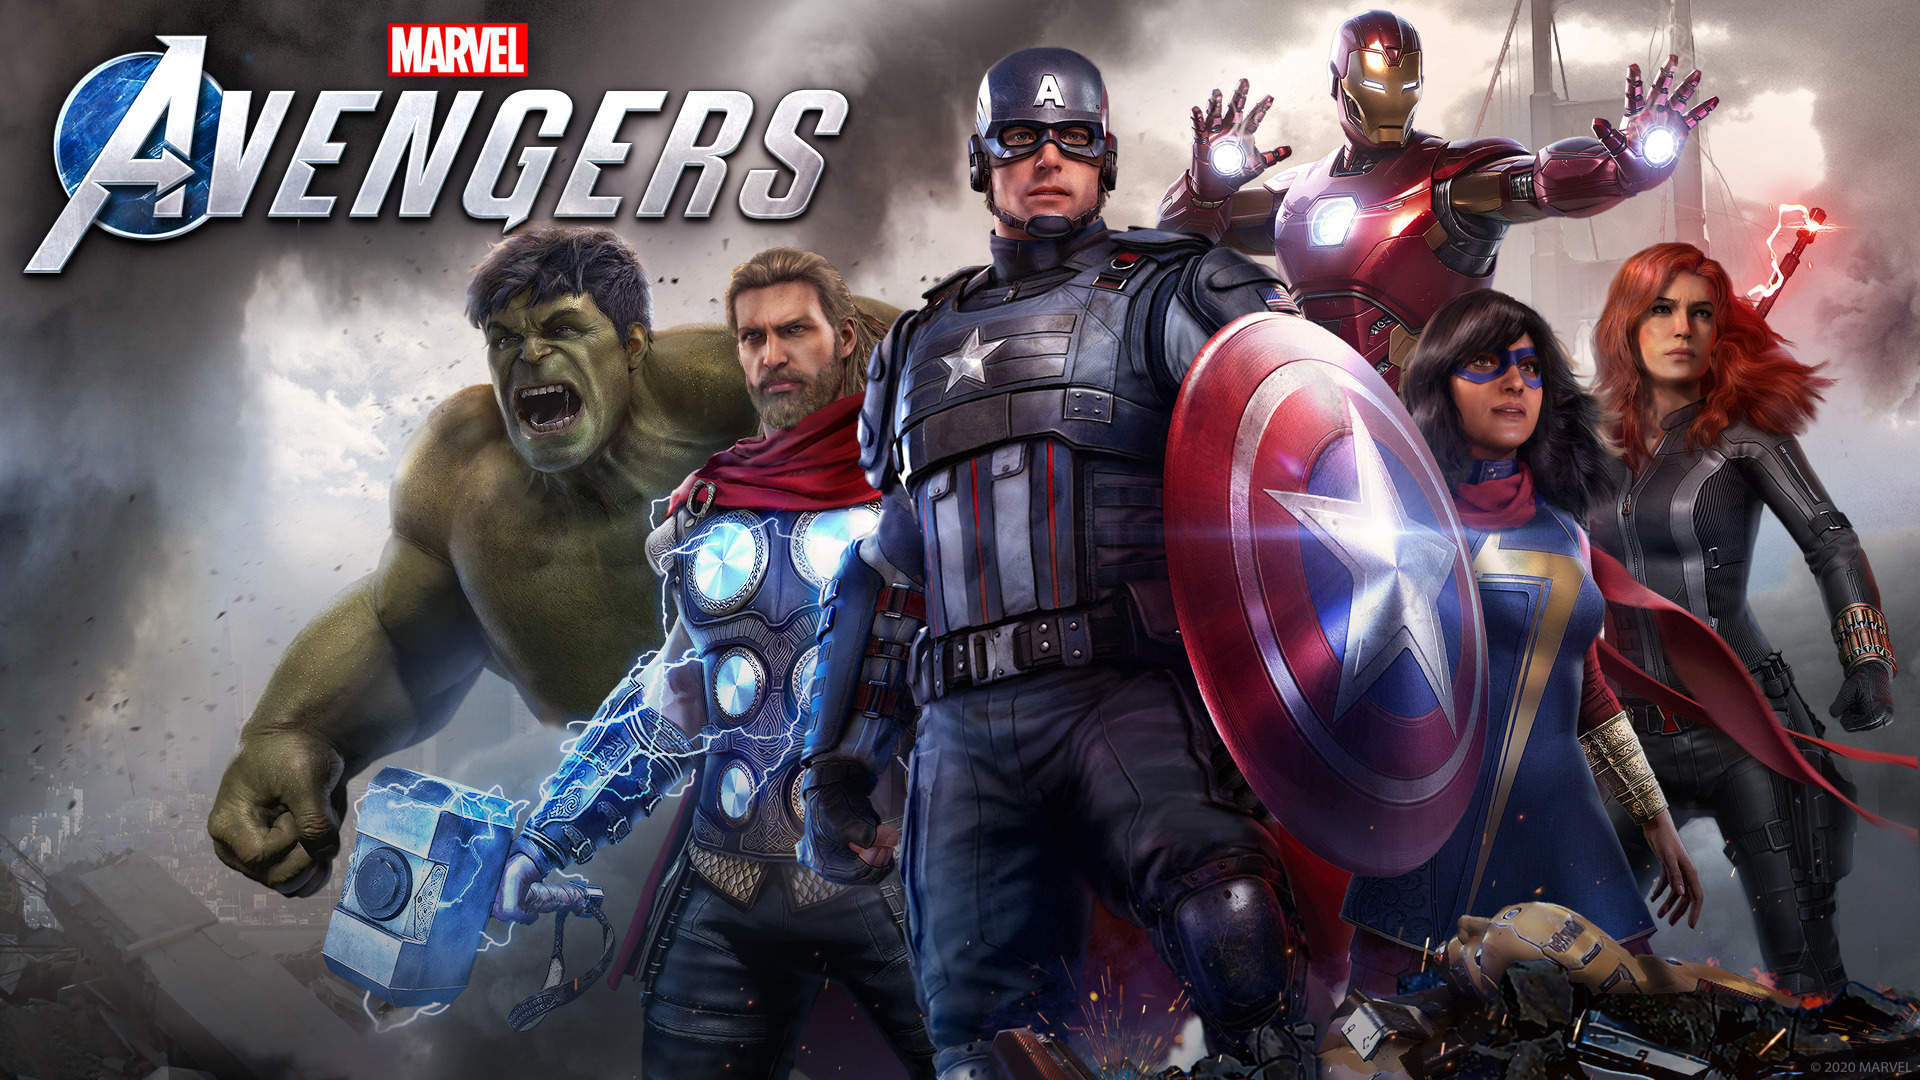 The Avengers download the last version for ios